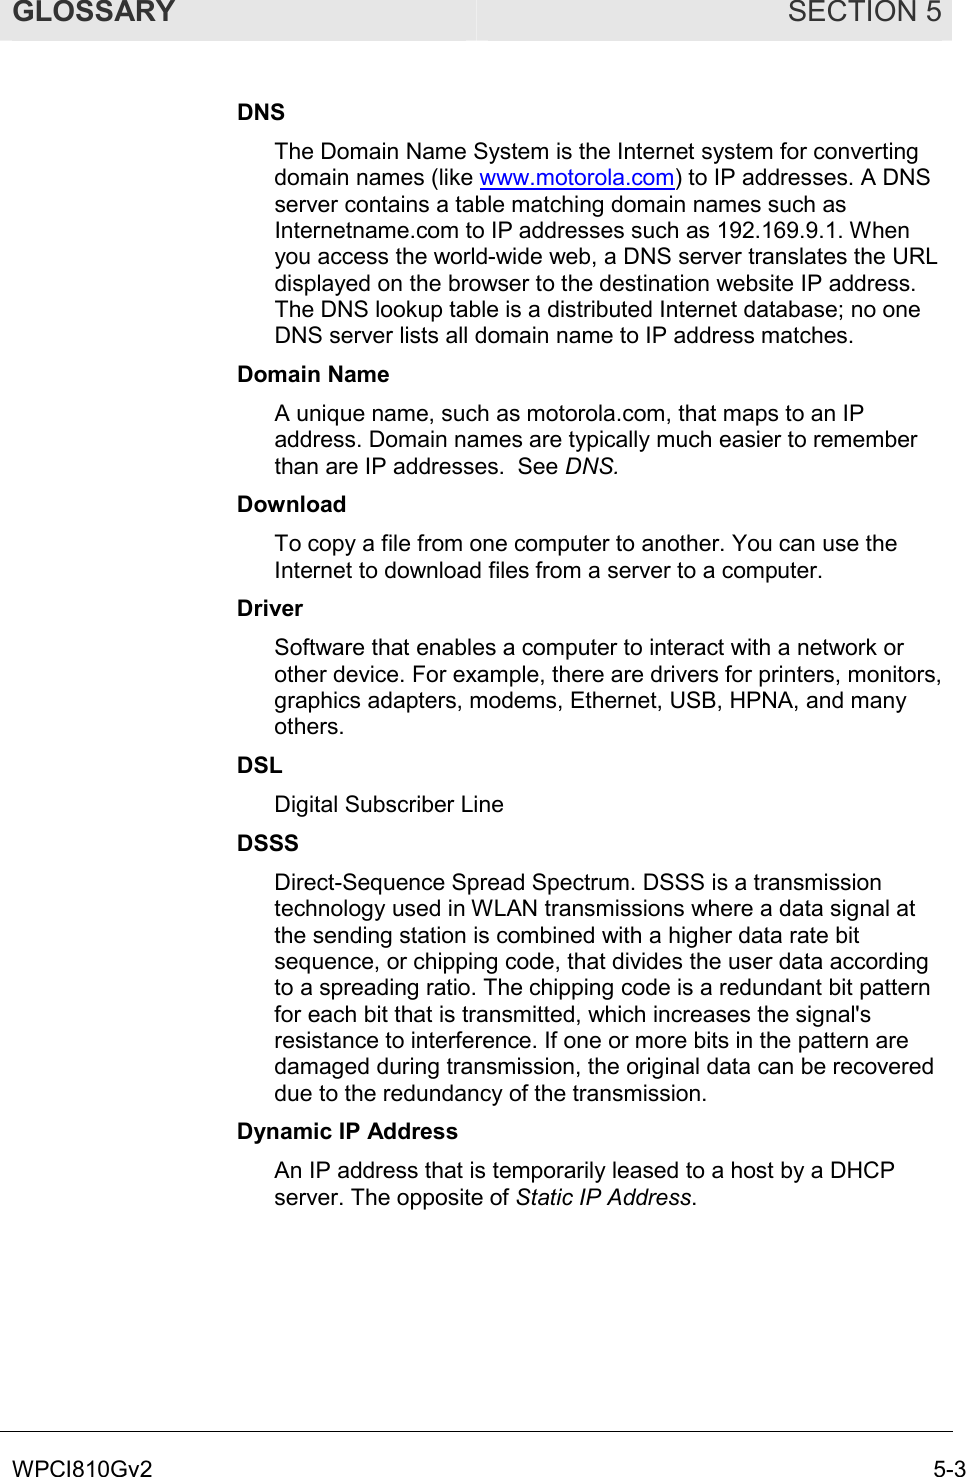 GLOSSARY SECTION 5 WPCI810Gv2  5-3 DNS The Domain Name System is the Internet system for converting domain names (like www.motorola.com) to IP addresses. A DNS server contains a table matching domain names such as Internetname.com to IP addresses such as 192.169.9.1. When you access the world-wide web, a DNS server translates the URL displayed on the browser to the destination website IP address. The DNS lookup table is a distributed Internet database; no one DNS server lists all domain name to IP address matches. Domain Name A unique name, such as motorola.com, that maps to an IP address. Domain names are typically much easier to remember than are IP addresses.  See DNS. Download To copy a file from one computer to another. You can use the Internet to download files from a server to a computer.  Driver Software that enables a computer to interact with a network or other device. For example, there are drivers for printers, monitors, graphics adapters, modems, Ethernet, USB, HPNA, and many others. DSL Digital Subscriber Line DSSS Direct-Sequence Spread Spectrum. DSSS is a transmission technology used in WLAN transmissions where a data signal at the sending station is combined with a higher data rate bit sequence, or chipping code, that divides the user data according to a spreading ratio. The chipping code is a redundant bit pattern for each bit that is transmitted, which increases the signal&apos;s resistance to interference. If one or more bits in the pattern are damaged during transmission, the original data can be recovered due to the redundancy of the transmission.  Dynamic IP Address An IP address that is temporarily leased to a host by a DHCP server. The opposite of Static IP Address. 